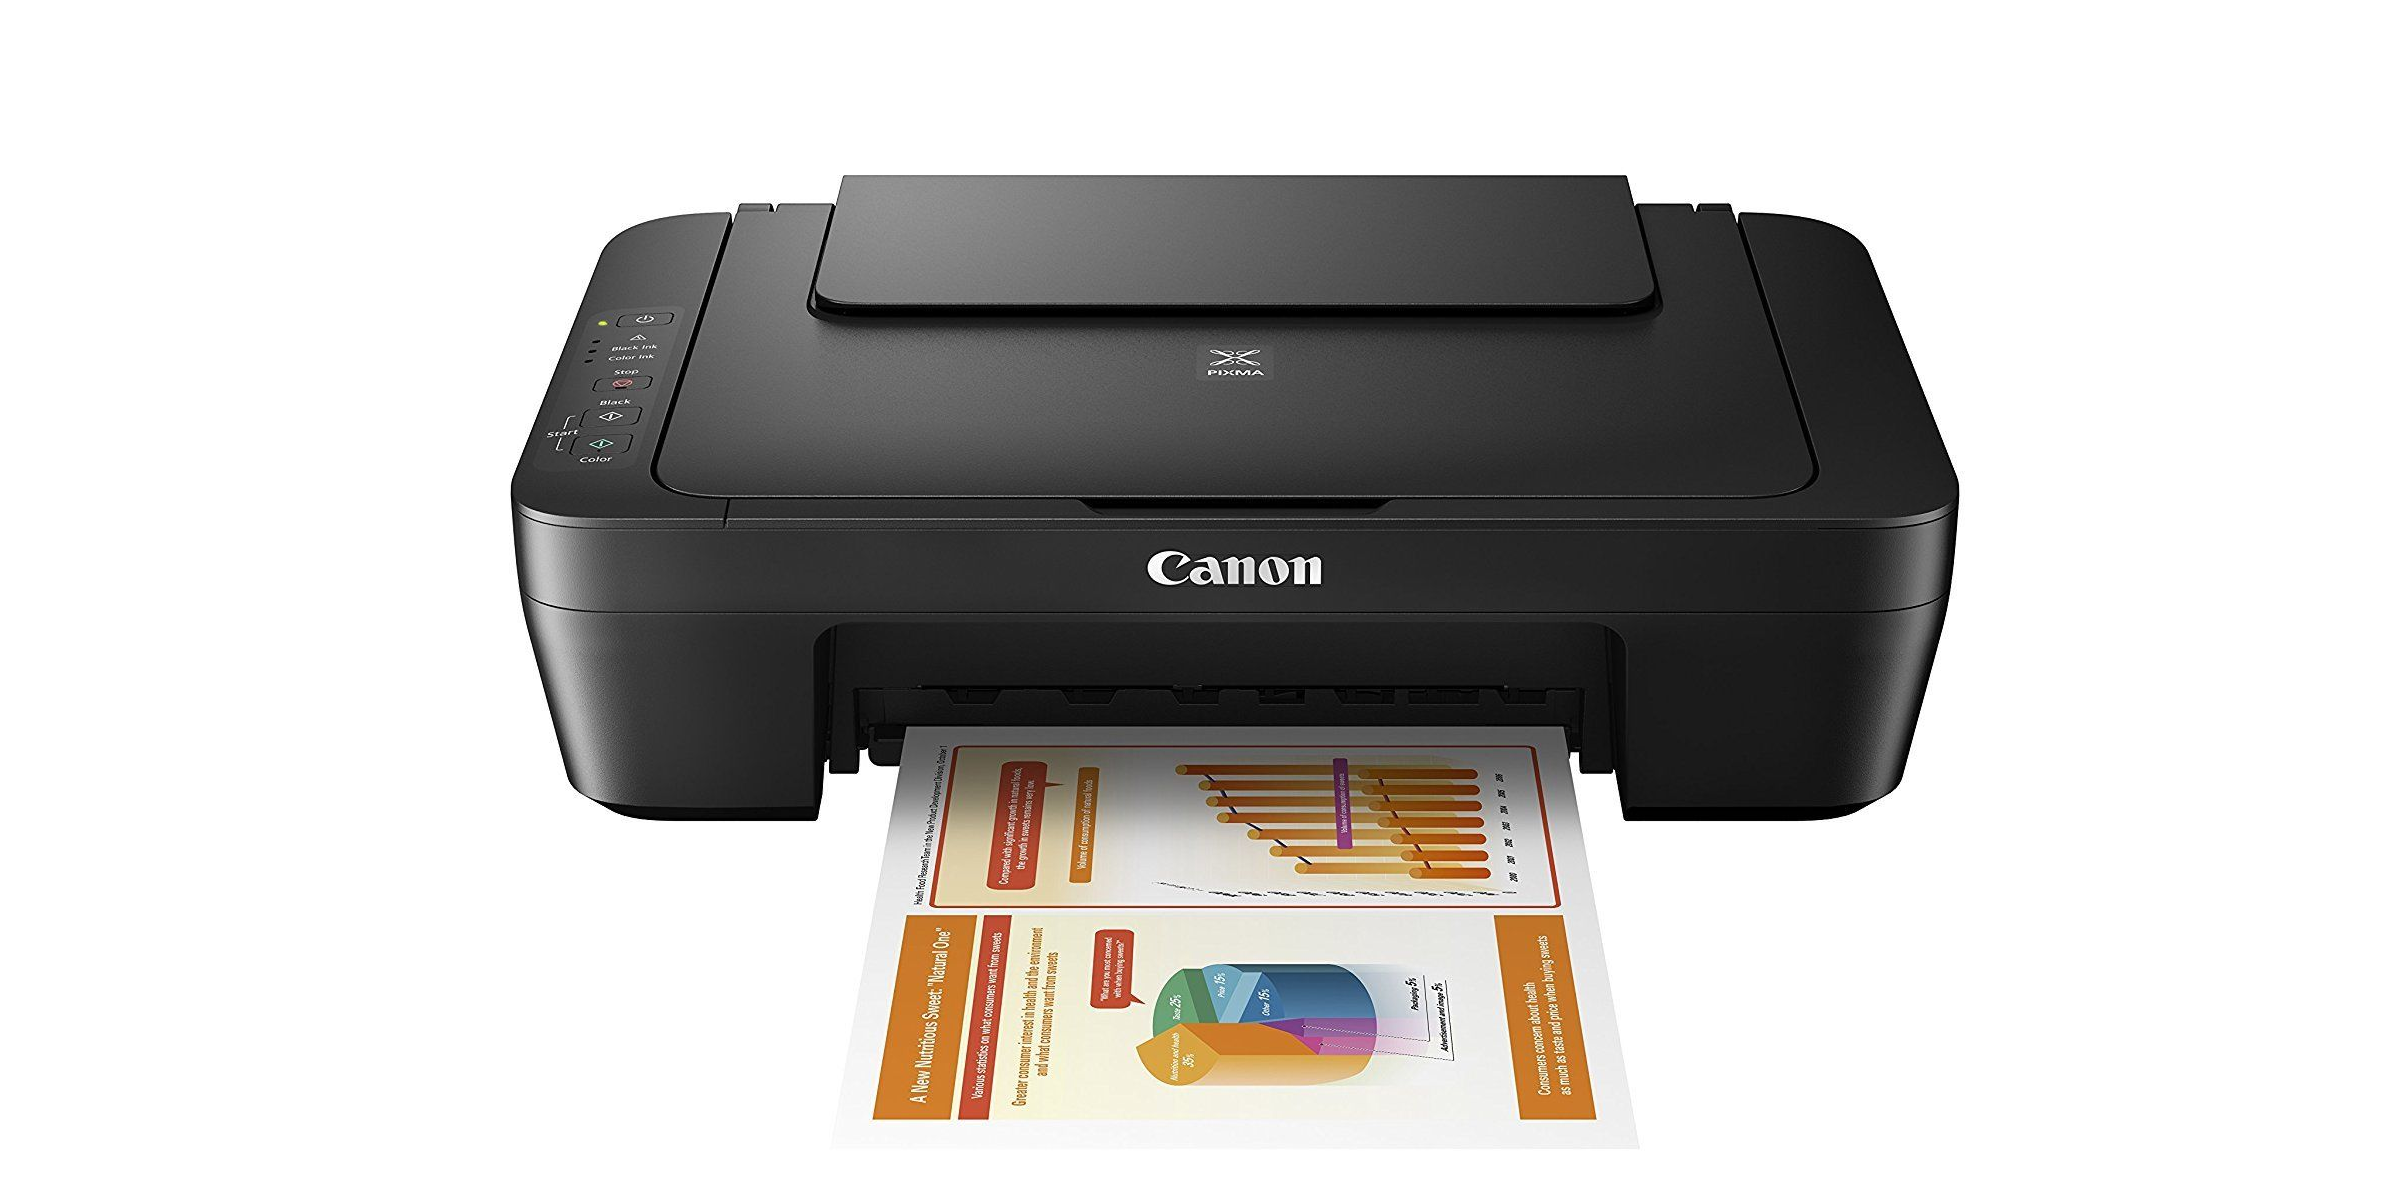 Canon PIXMA Inkjet All-in-One Color Photo Printer/Scanner/Copier—$29.99 Shipped!!